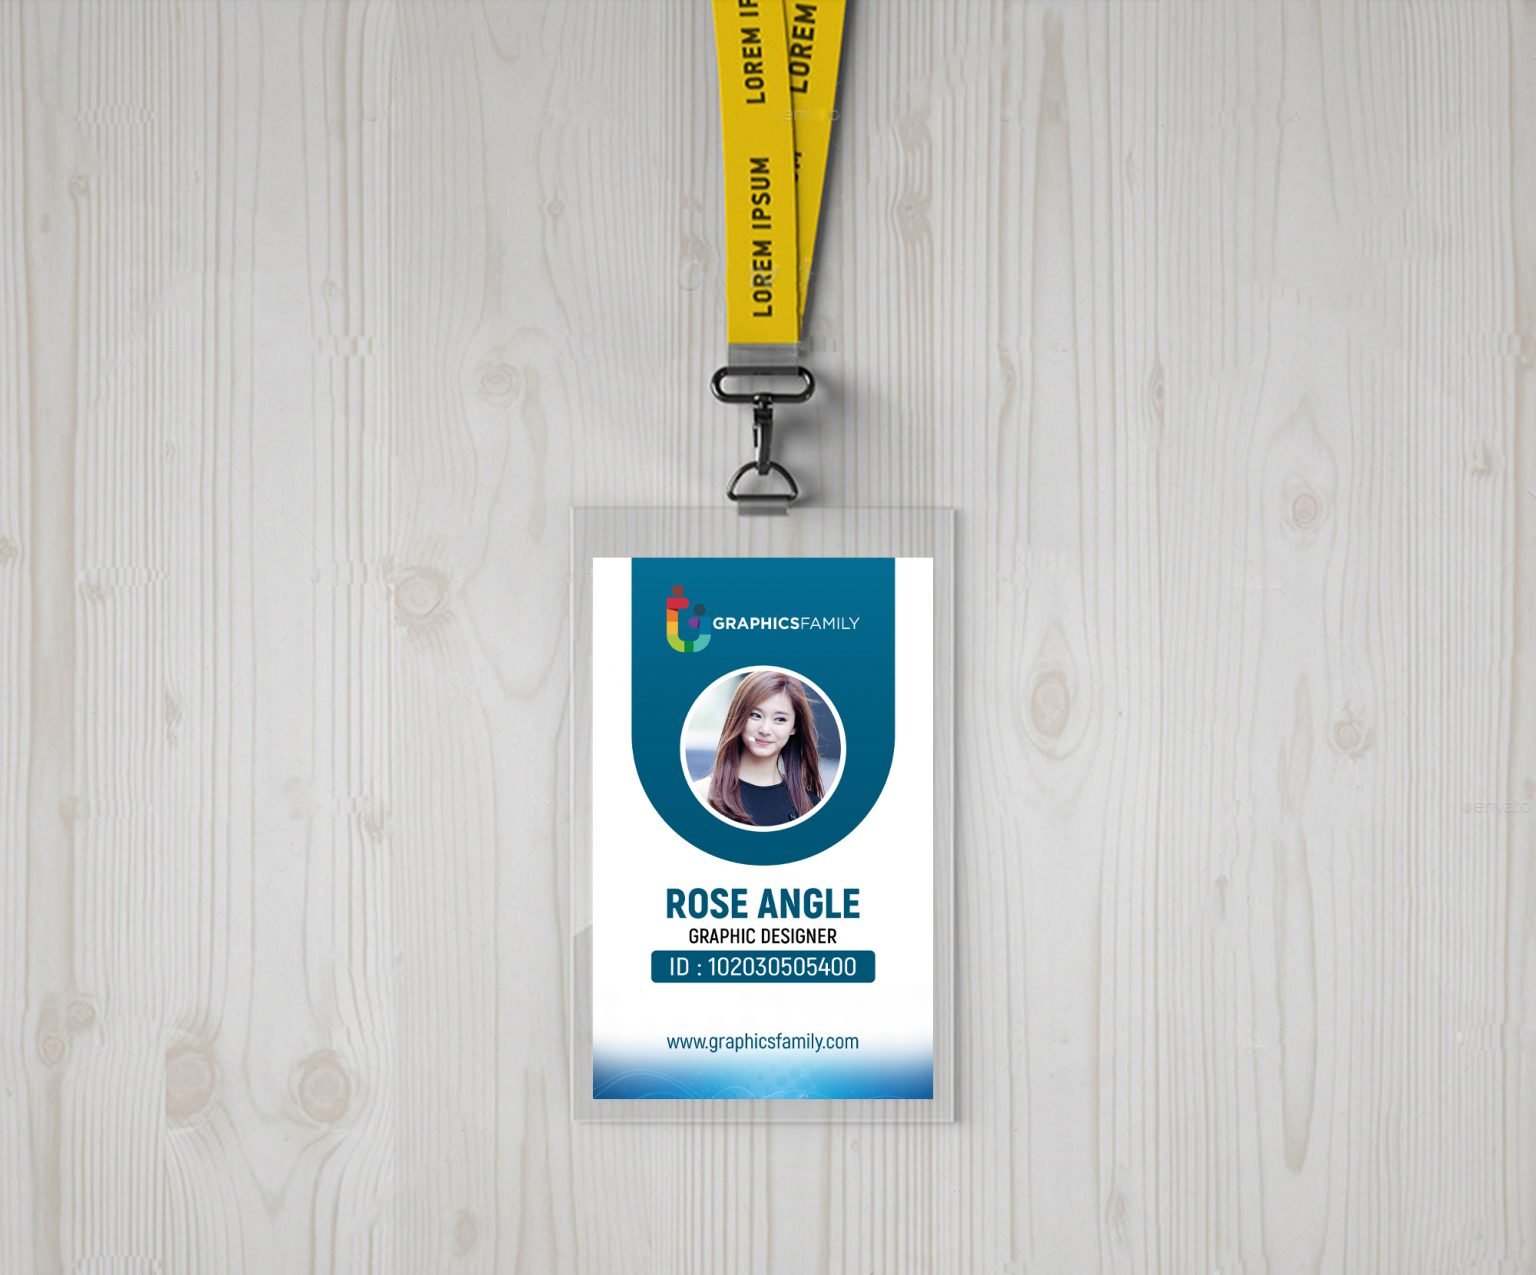 Company id-Card Design Free psd Template – GraphicsFamily